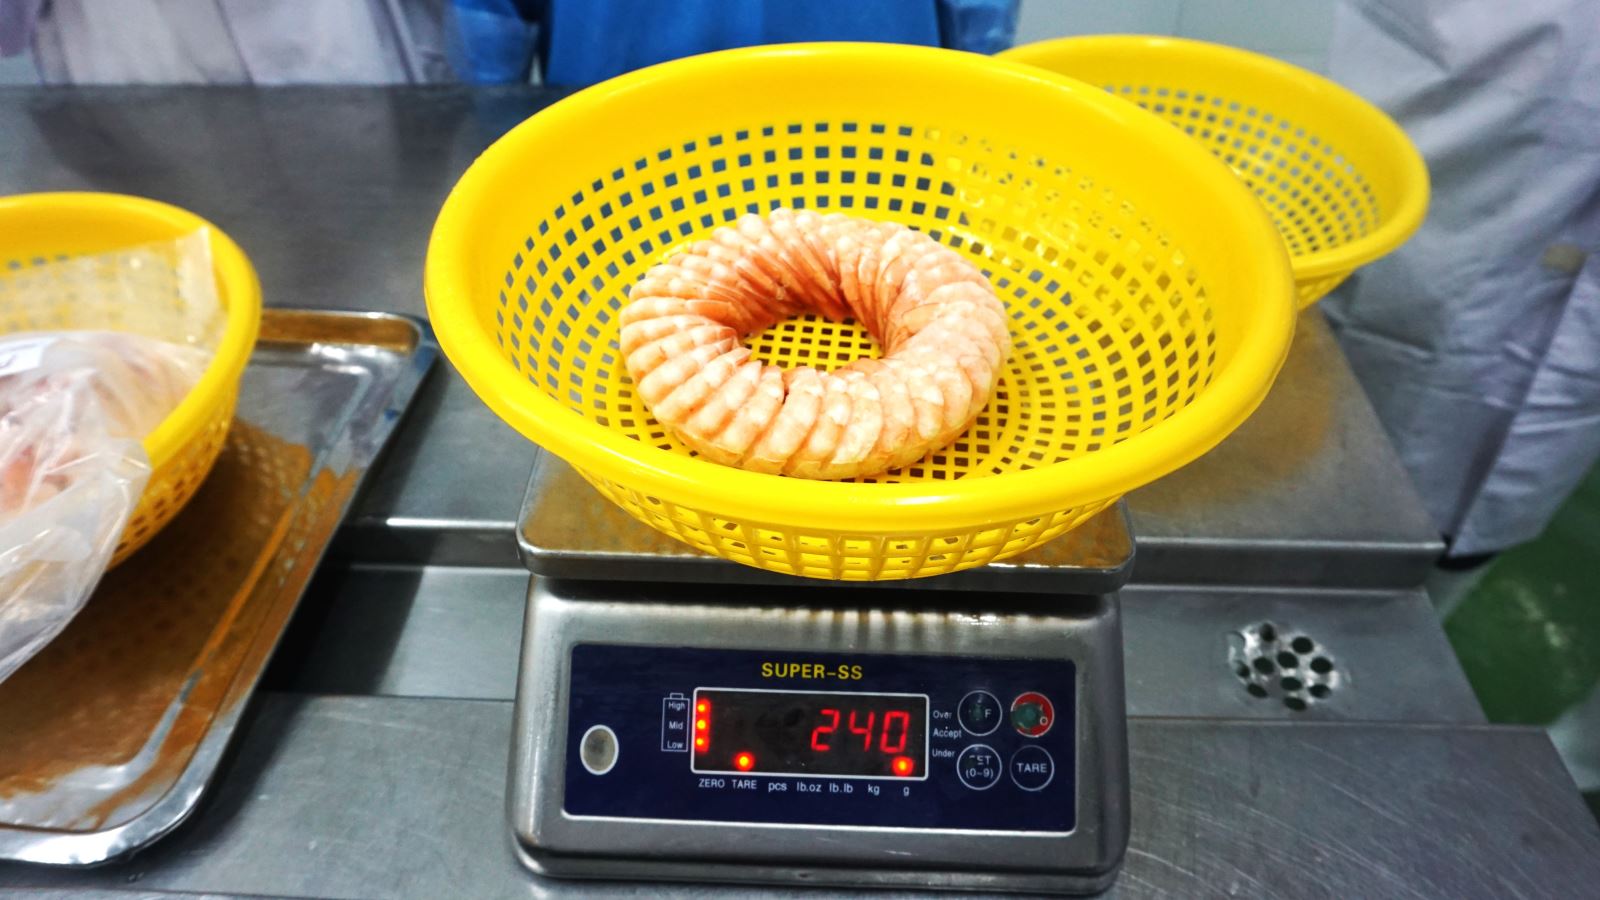 Cooked PDTO Vannamei Shrimp Ring For European Markets. Credit: Silvera Food